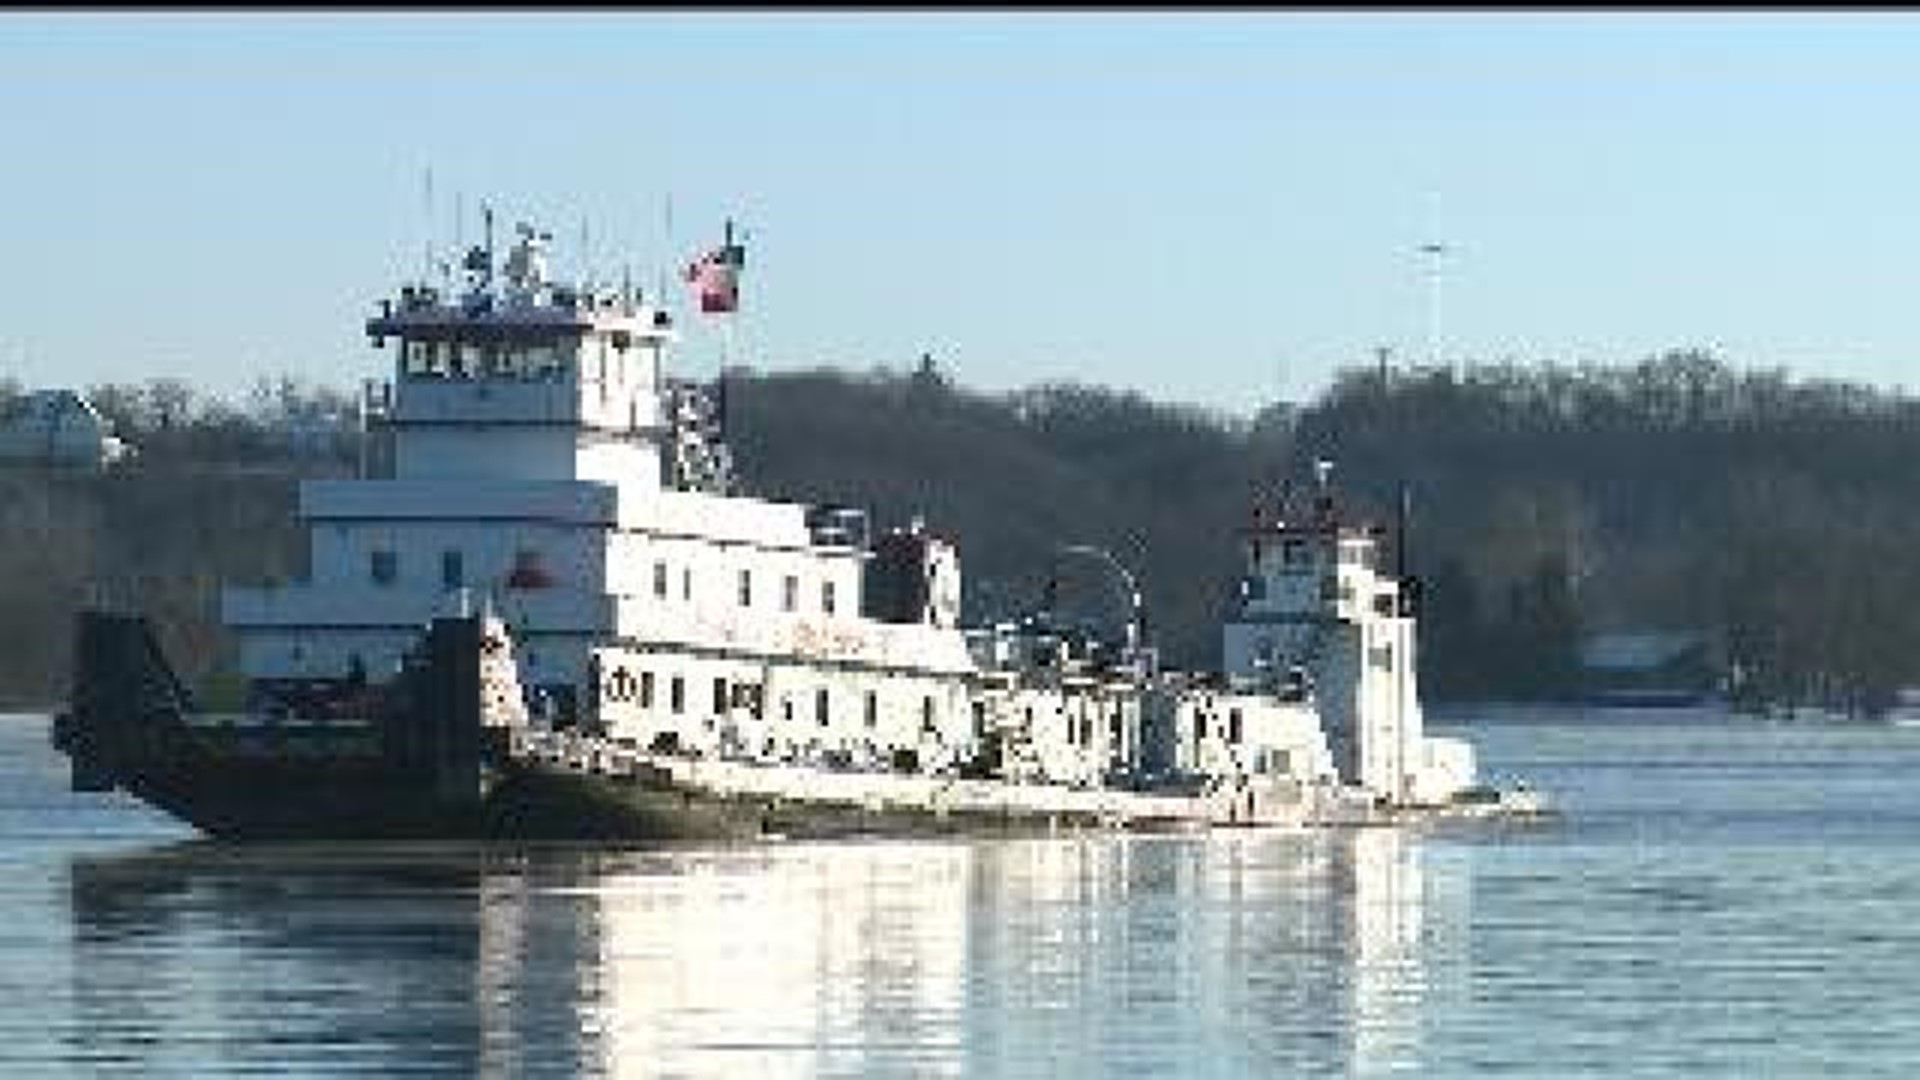 Towboat departs LeClaire for repairs